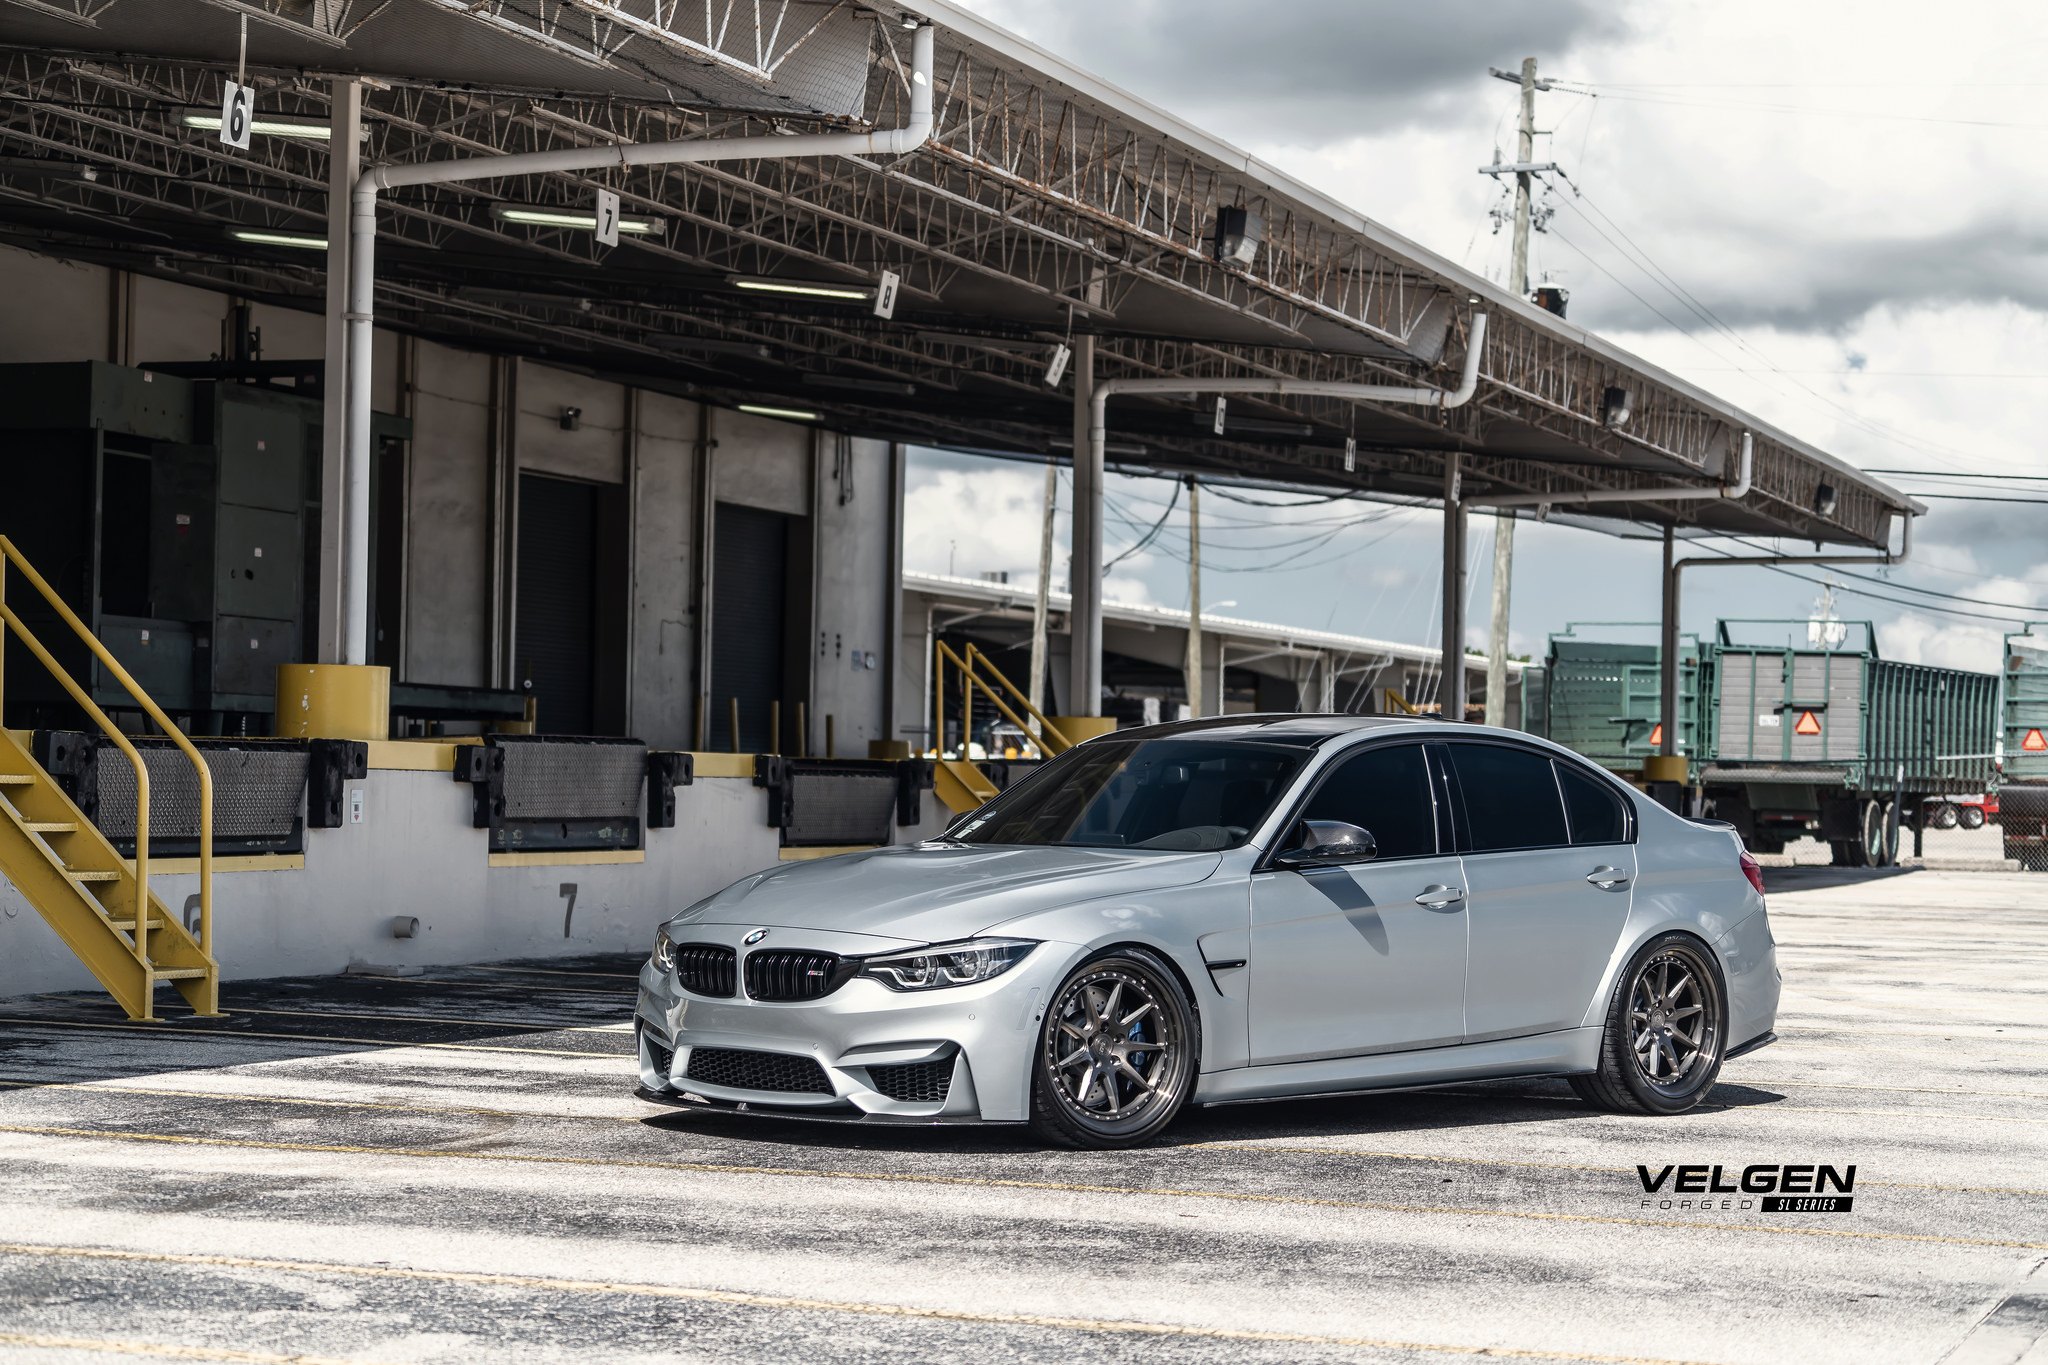 Silver BMW 3-Series with Aftermarket Front Bumper - Photo by Velgen Wheels